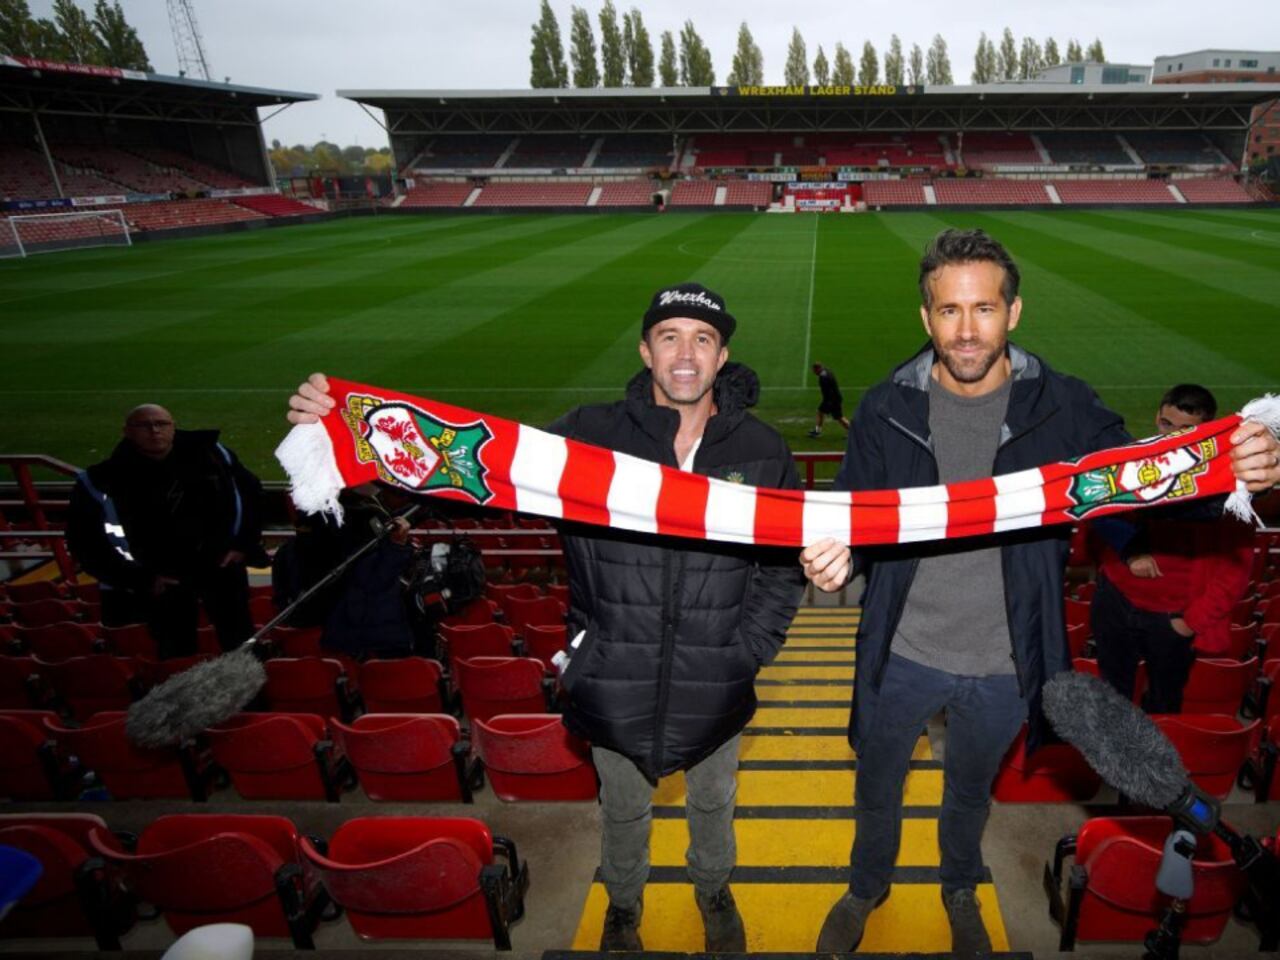 Ryan Reynolds bought a team at a bargain price and wants to take it to the Premier League